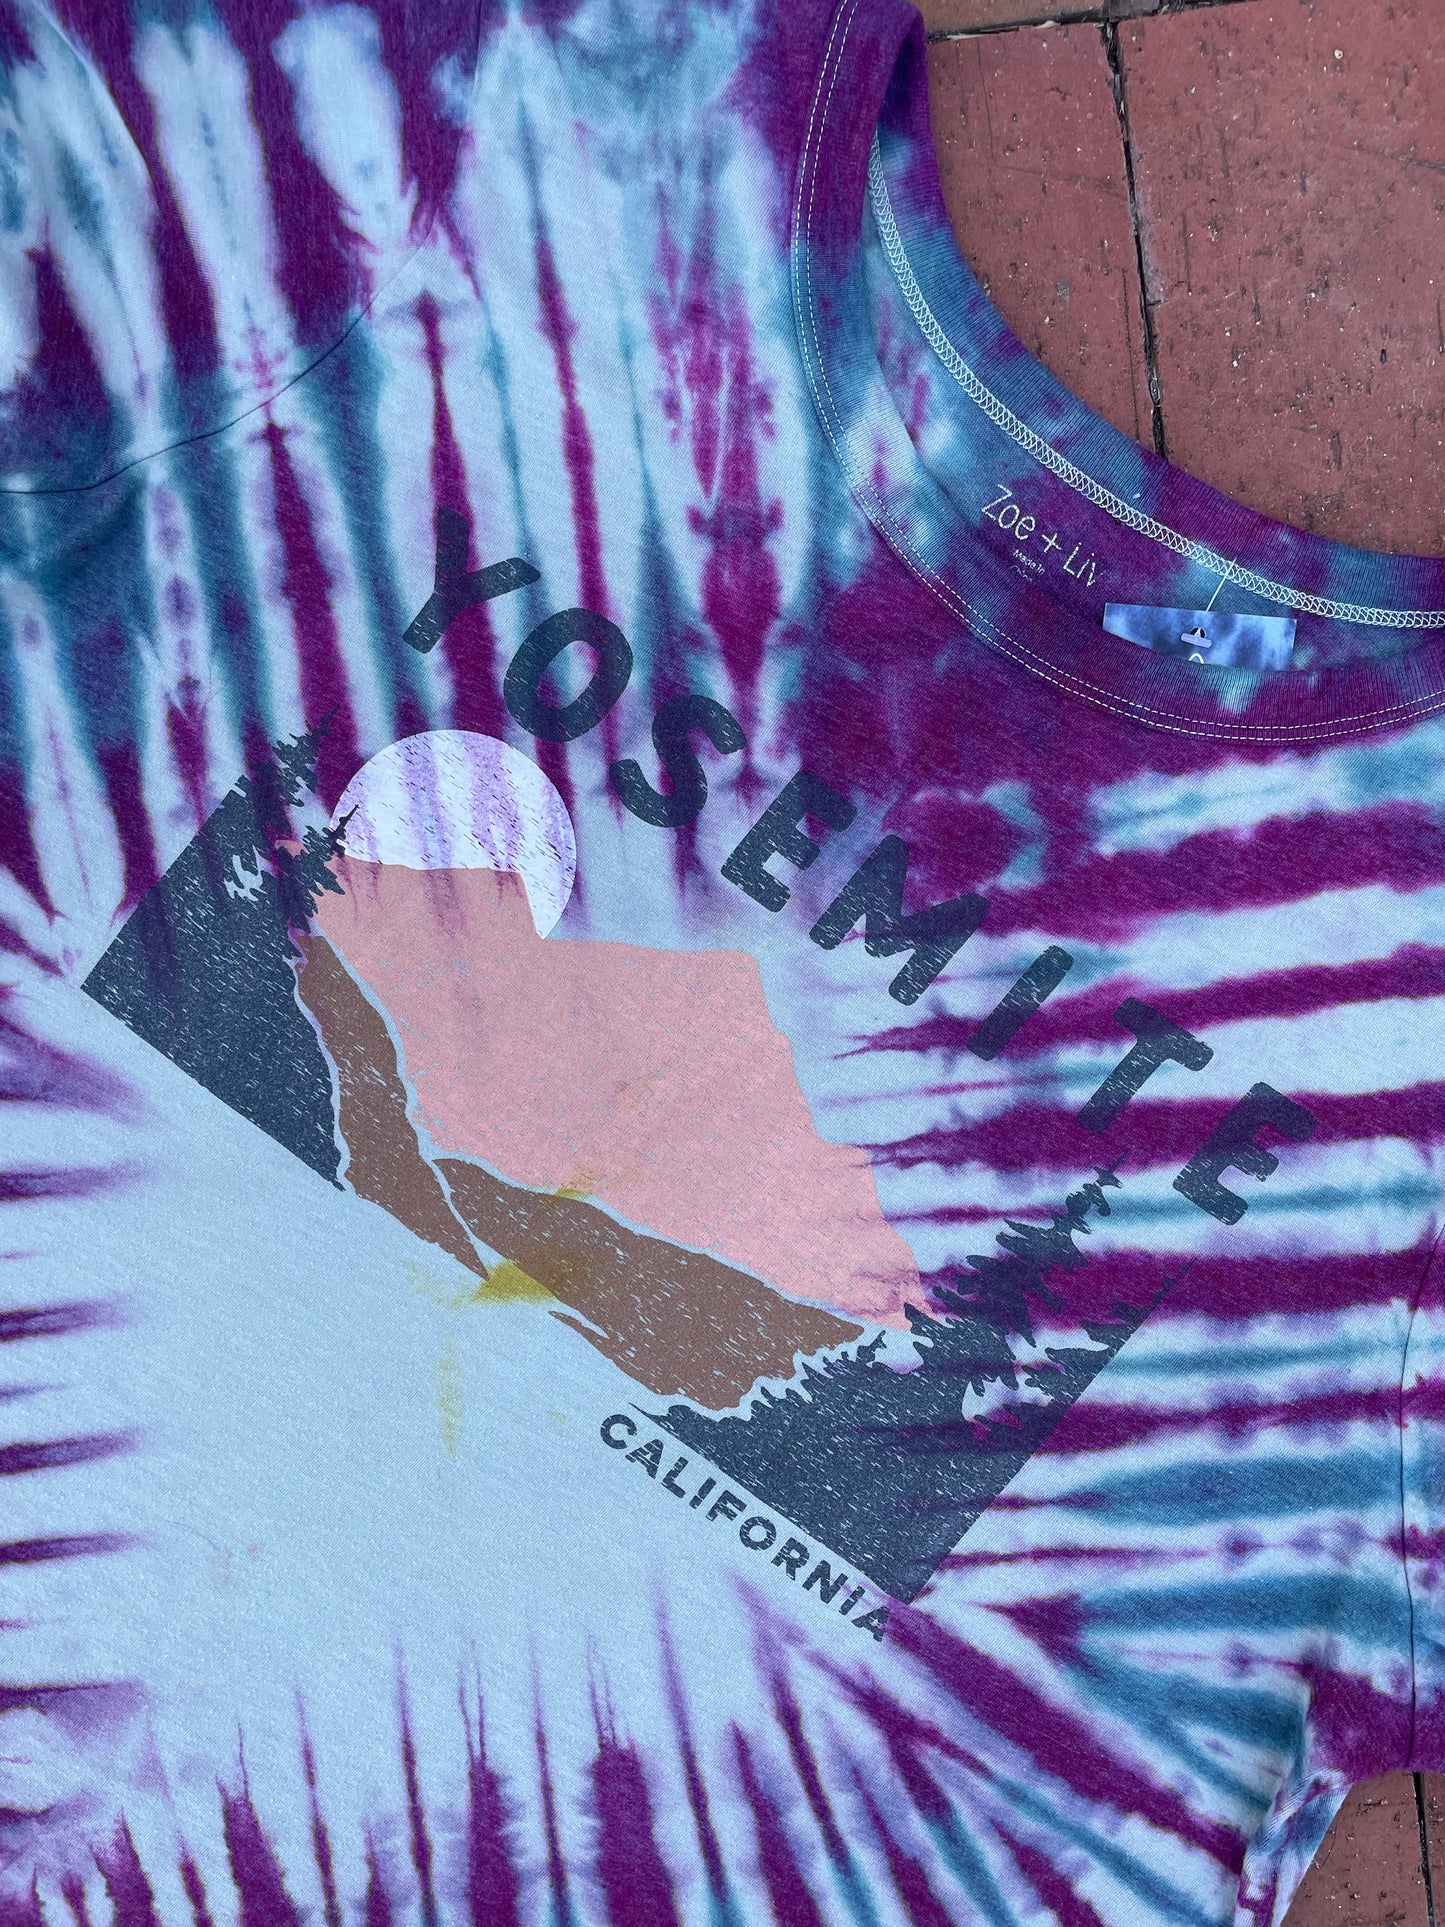 2XL Junior's Yosemite Mountains Tie Dye Short Sleeve T-Shirt | One-Of-a-Kind Upcycled Pink and Teal Graphic Tee